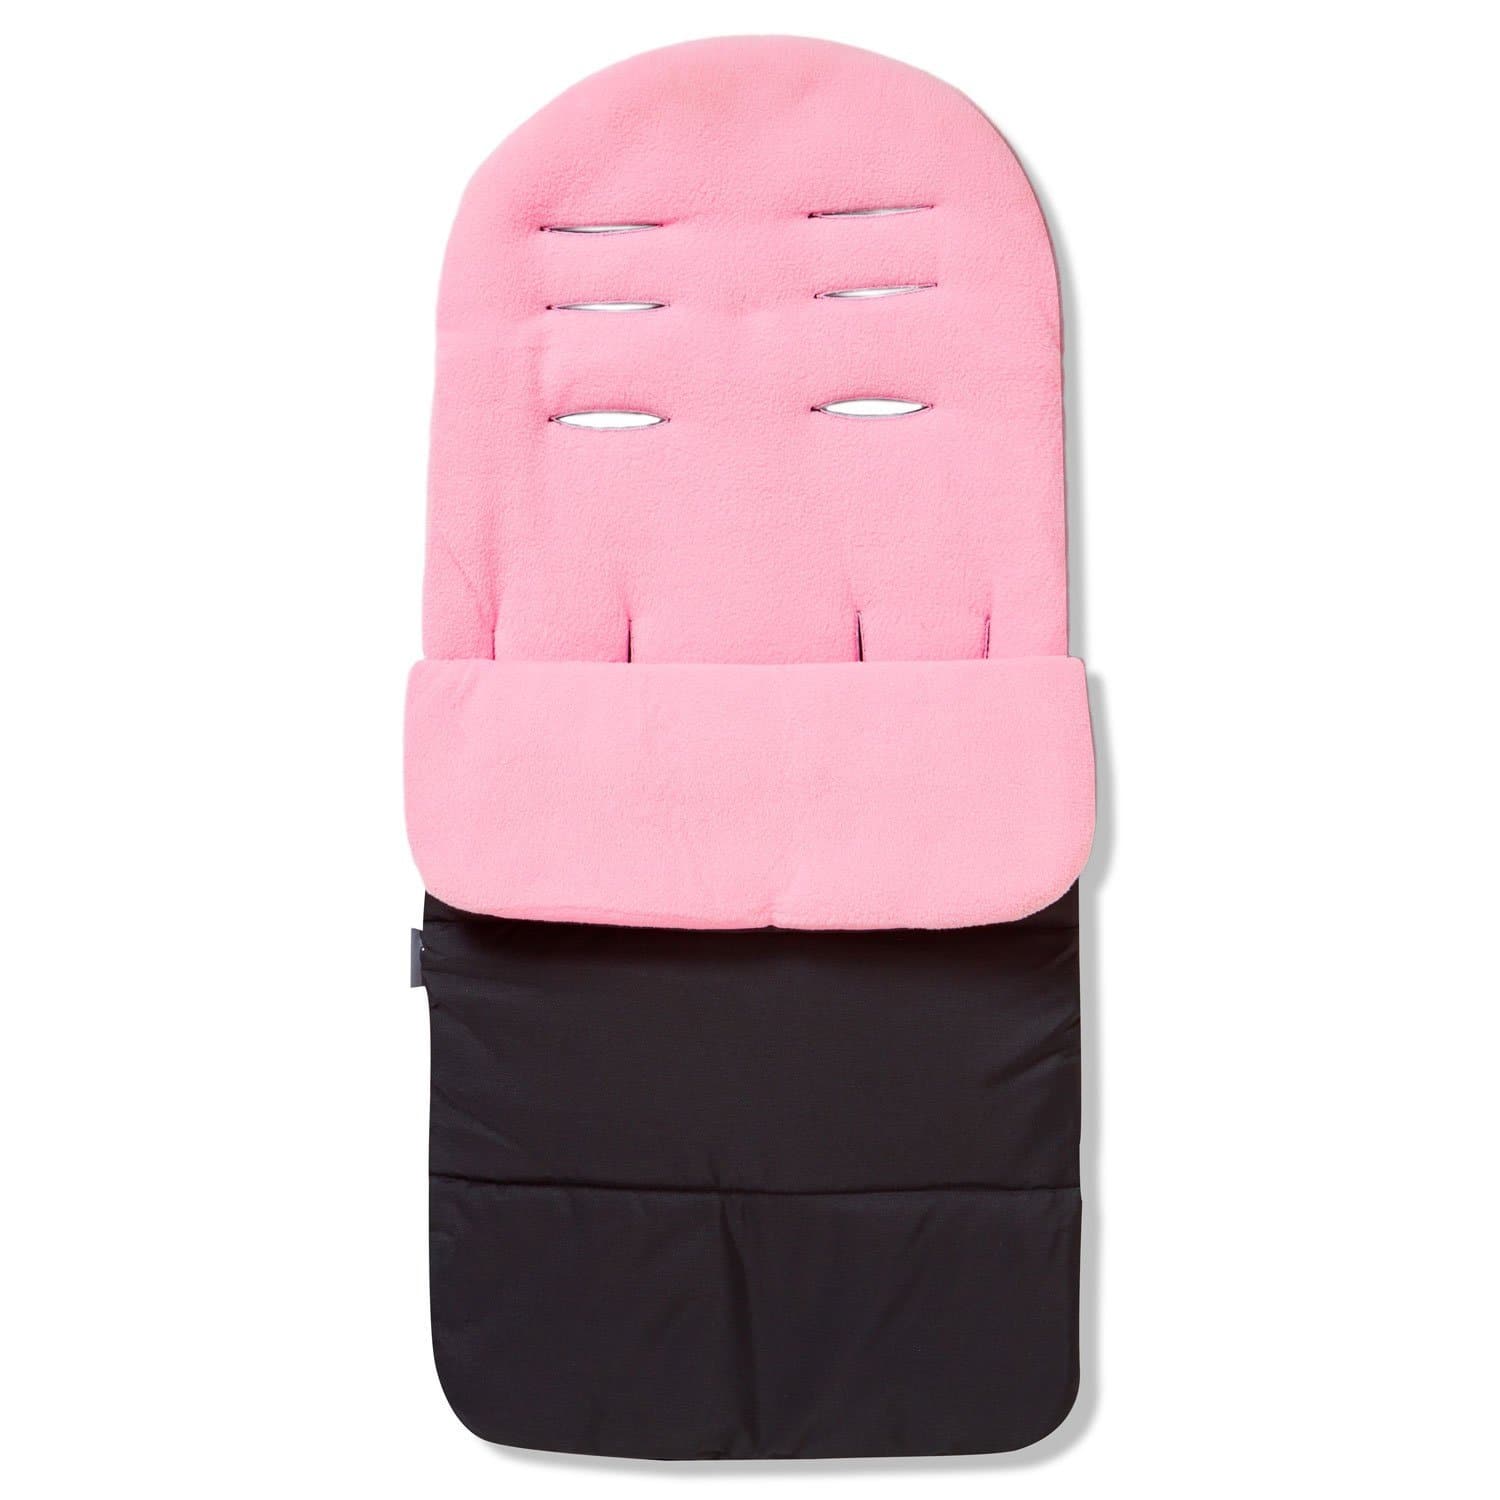 Premium Footmuff / Cosy Toes Compatible with Bumbleride - Candy Pink / Fits All Models | For Your Little One